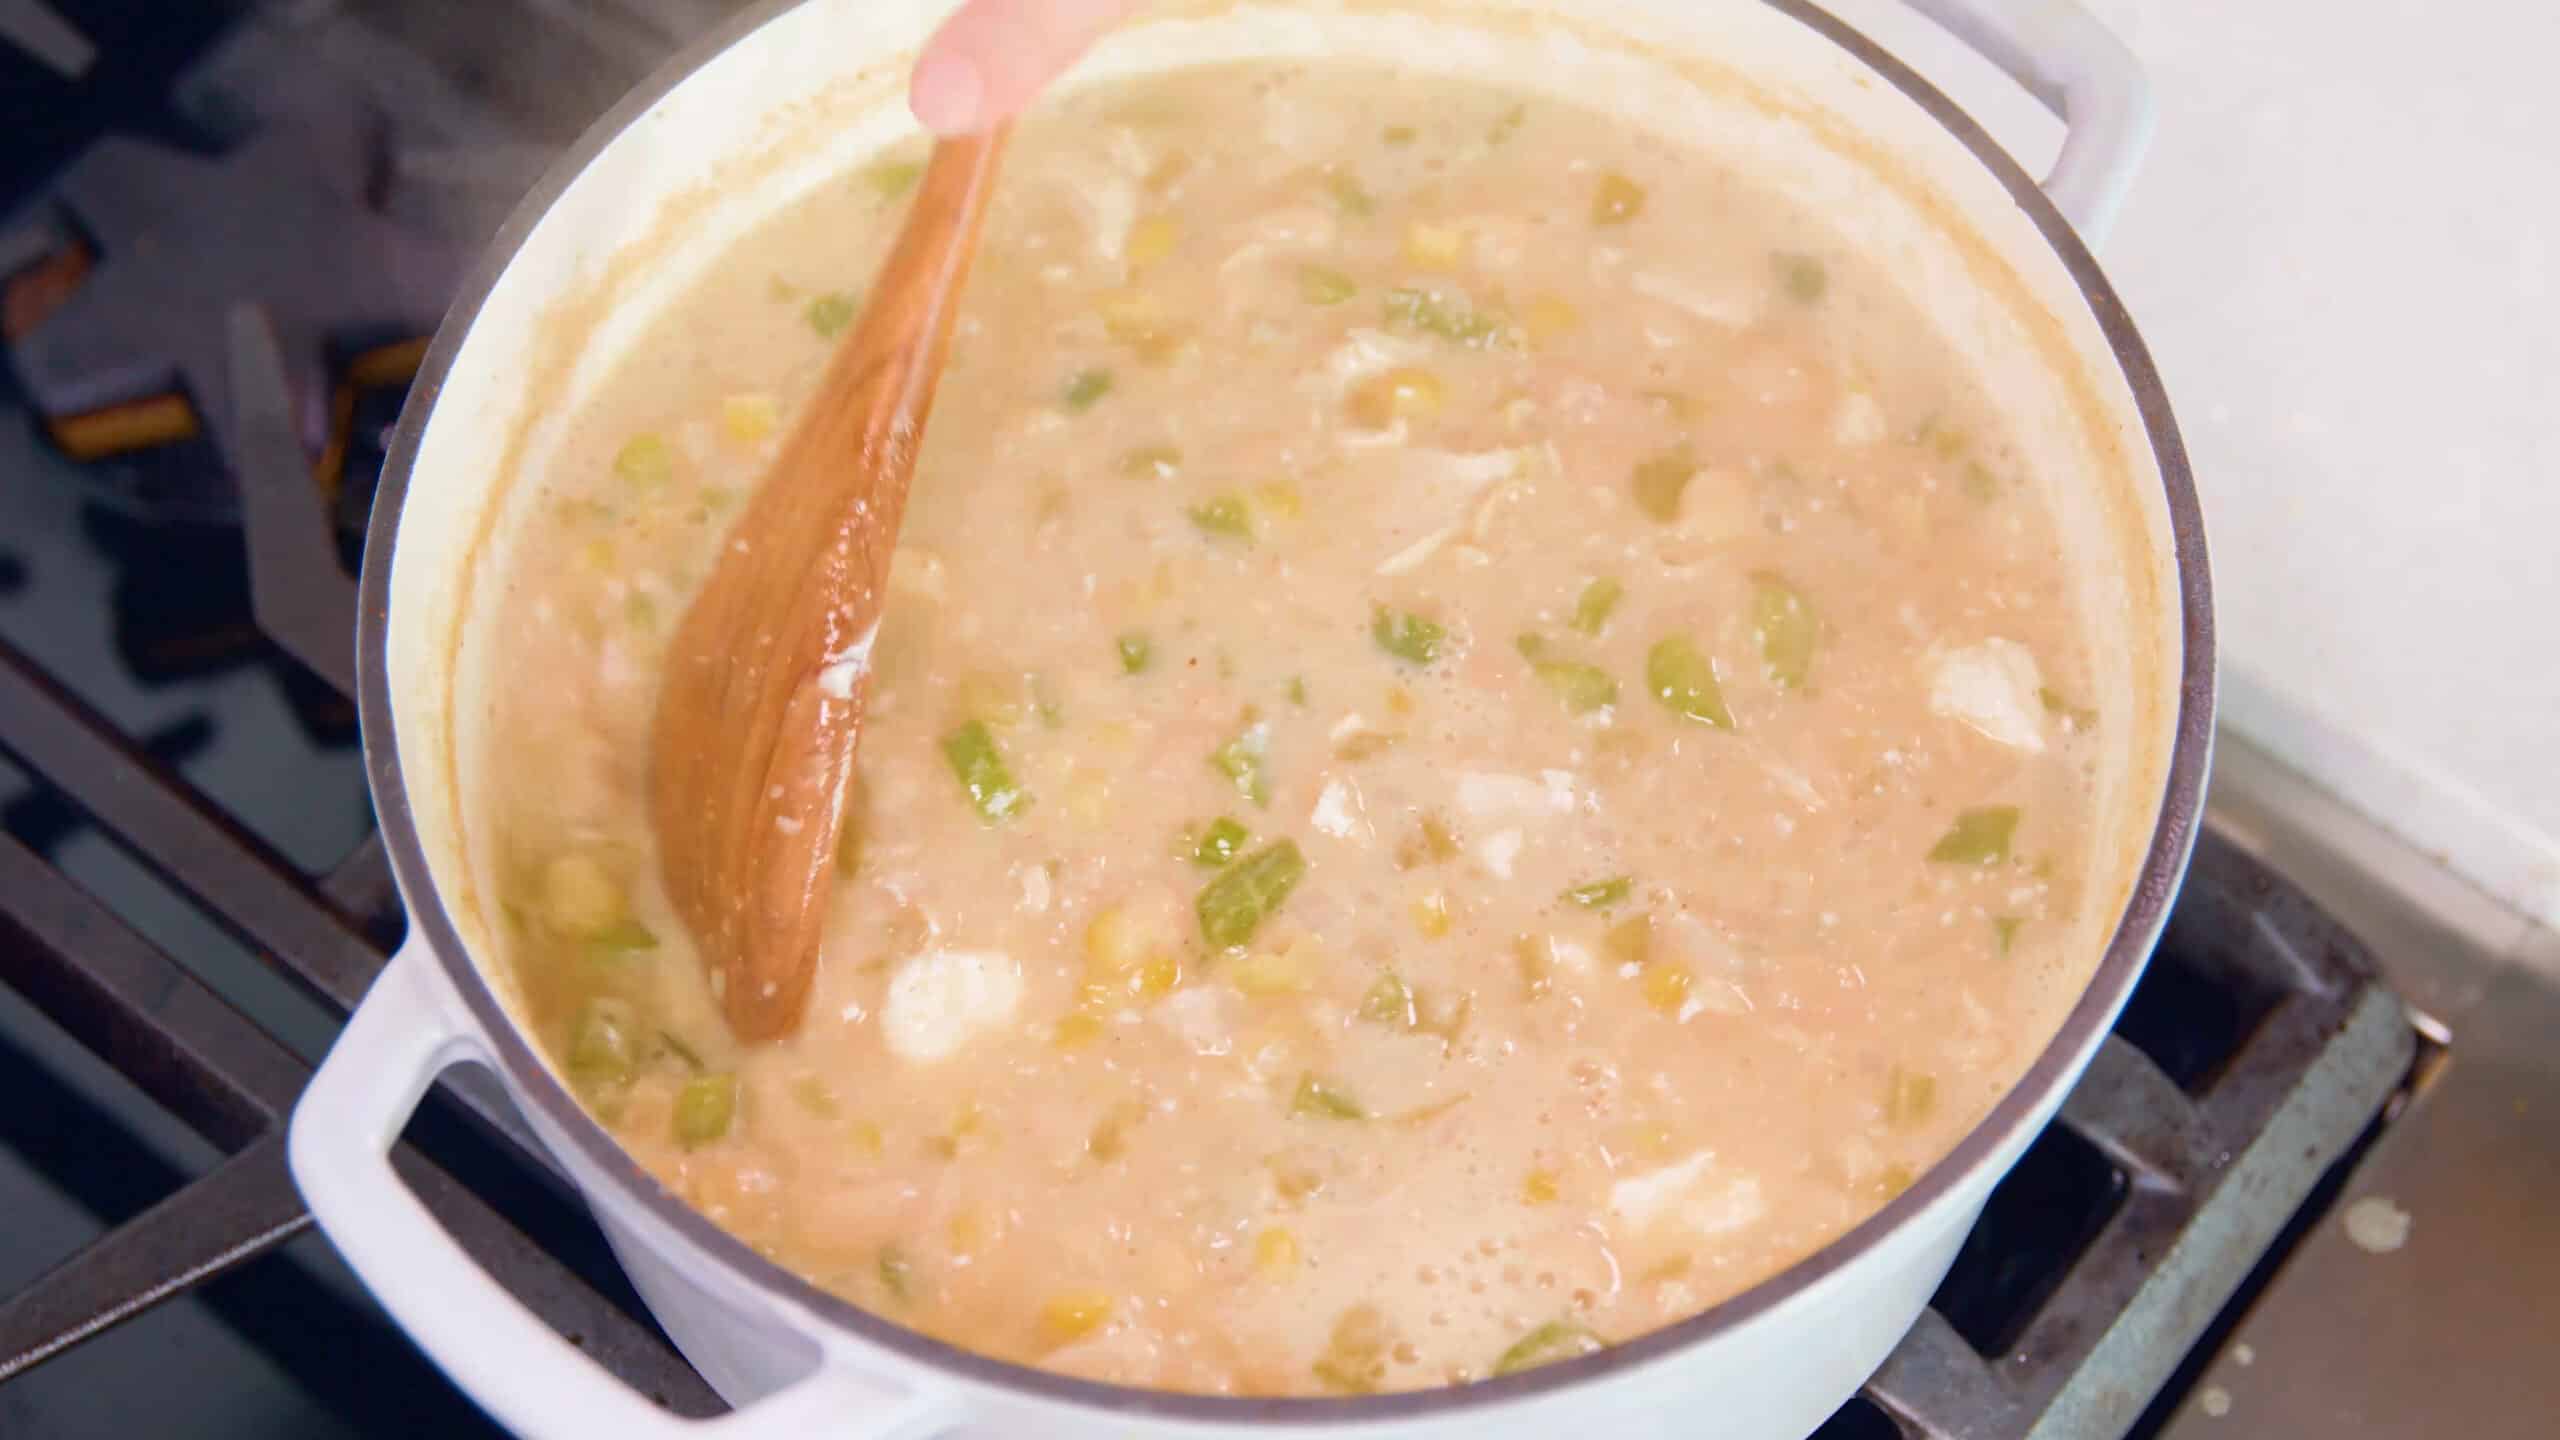 Overhead view of white enamel cast iron pot filled with white chicken chili simmers on the stovetop while a wooden spatula stirs the ingredients together.